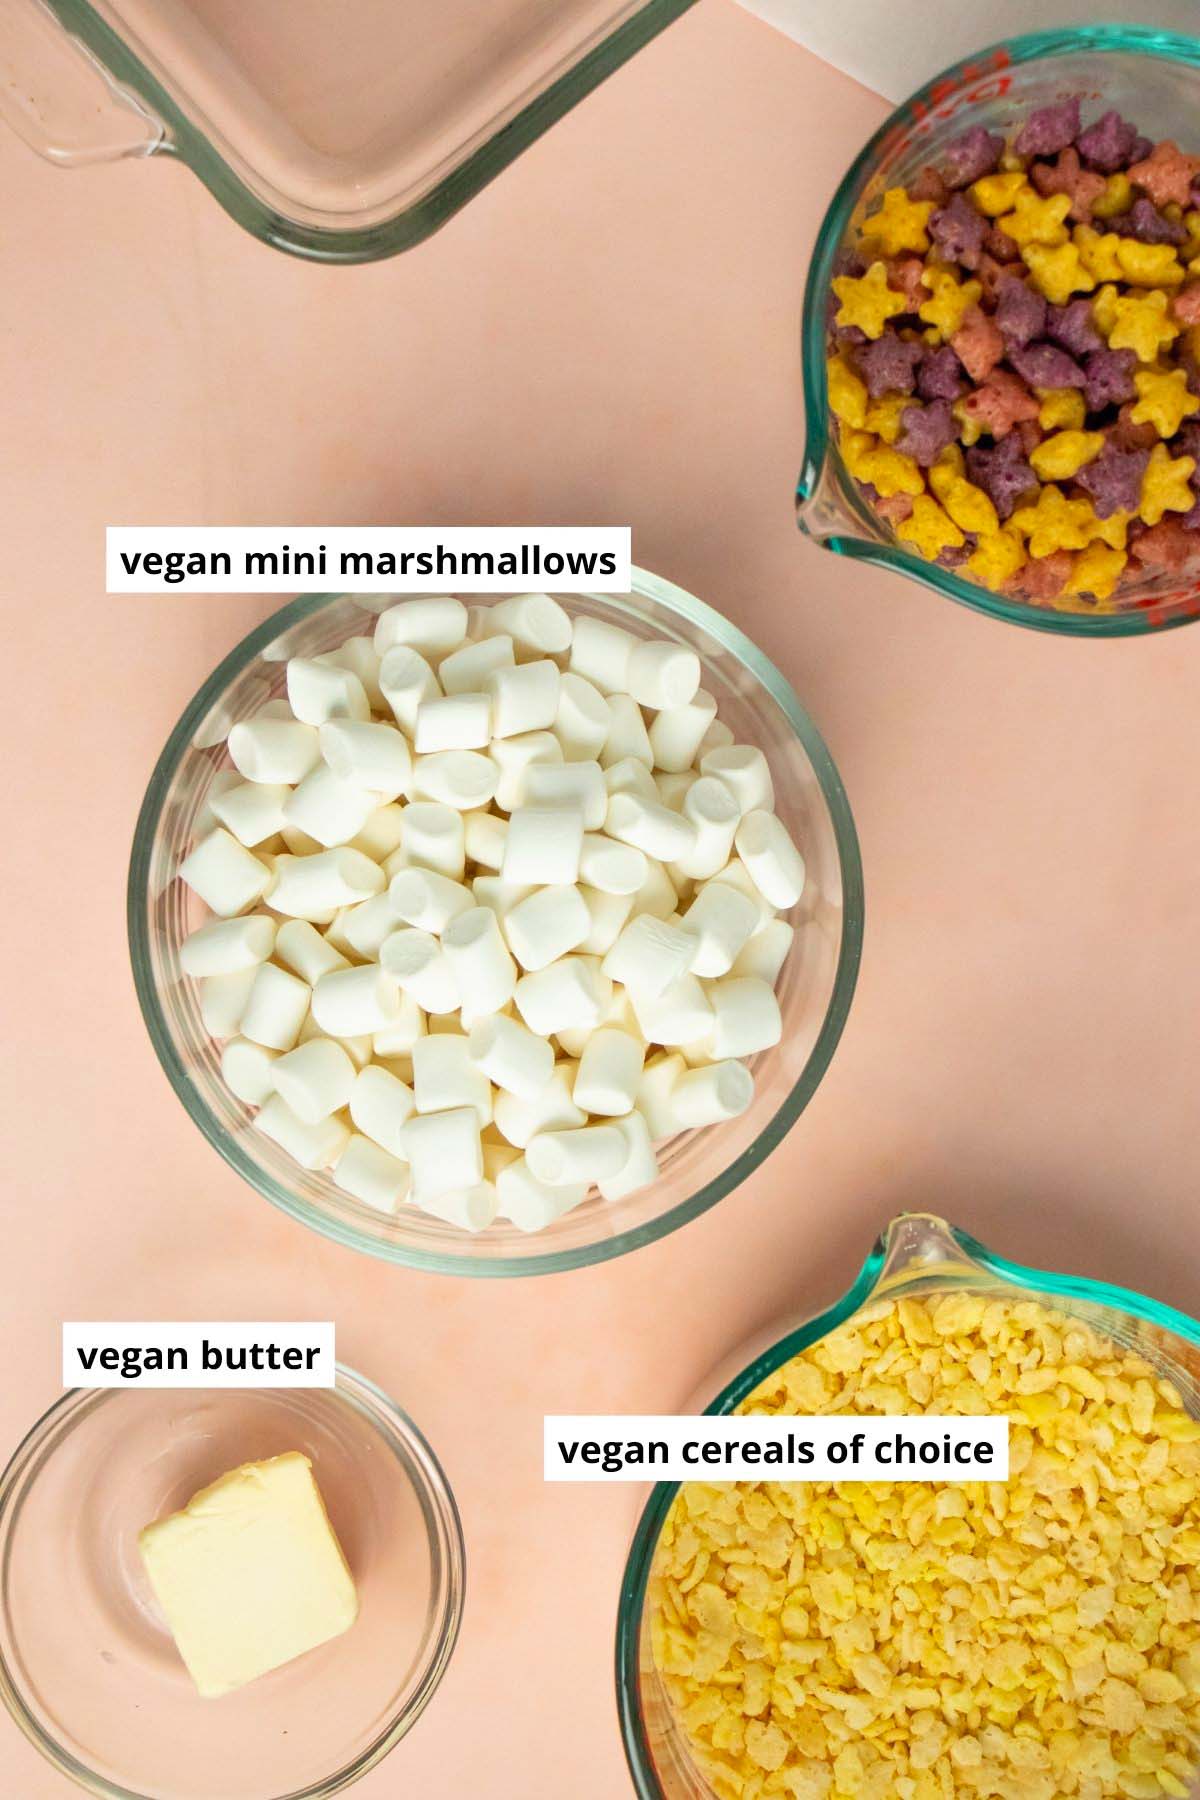 marshmallows, vegan butter, and cereal in bowls on a pink table